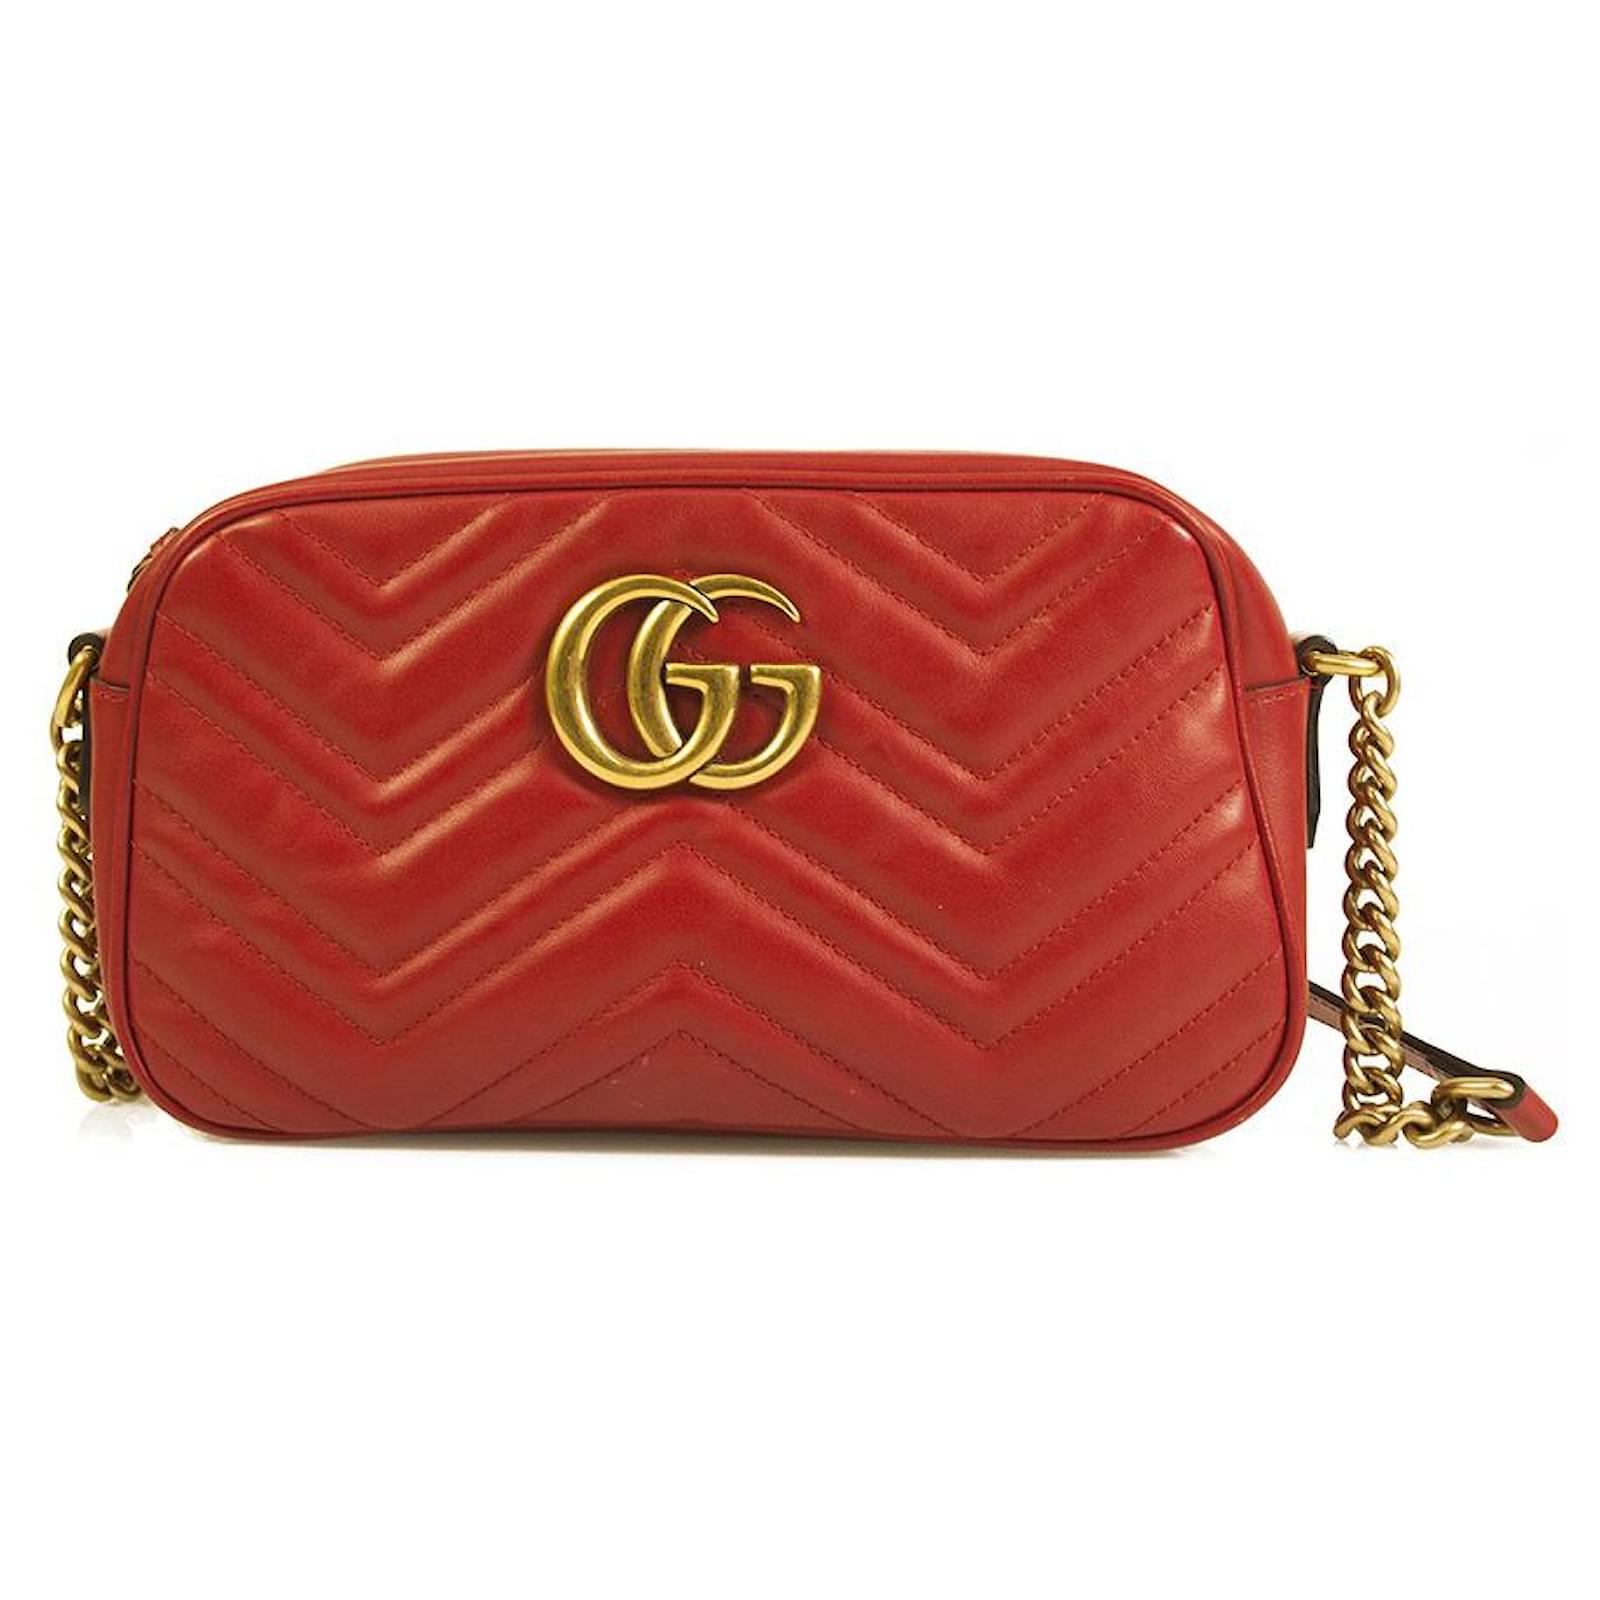 GG Marmont small shoulder bag in red leather